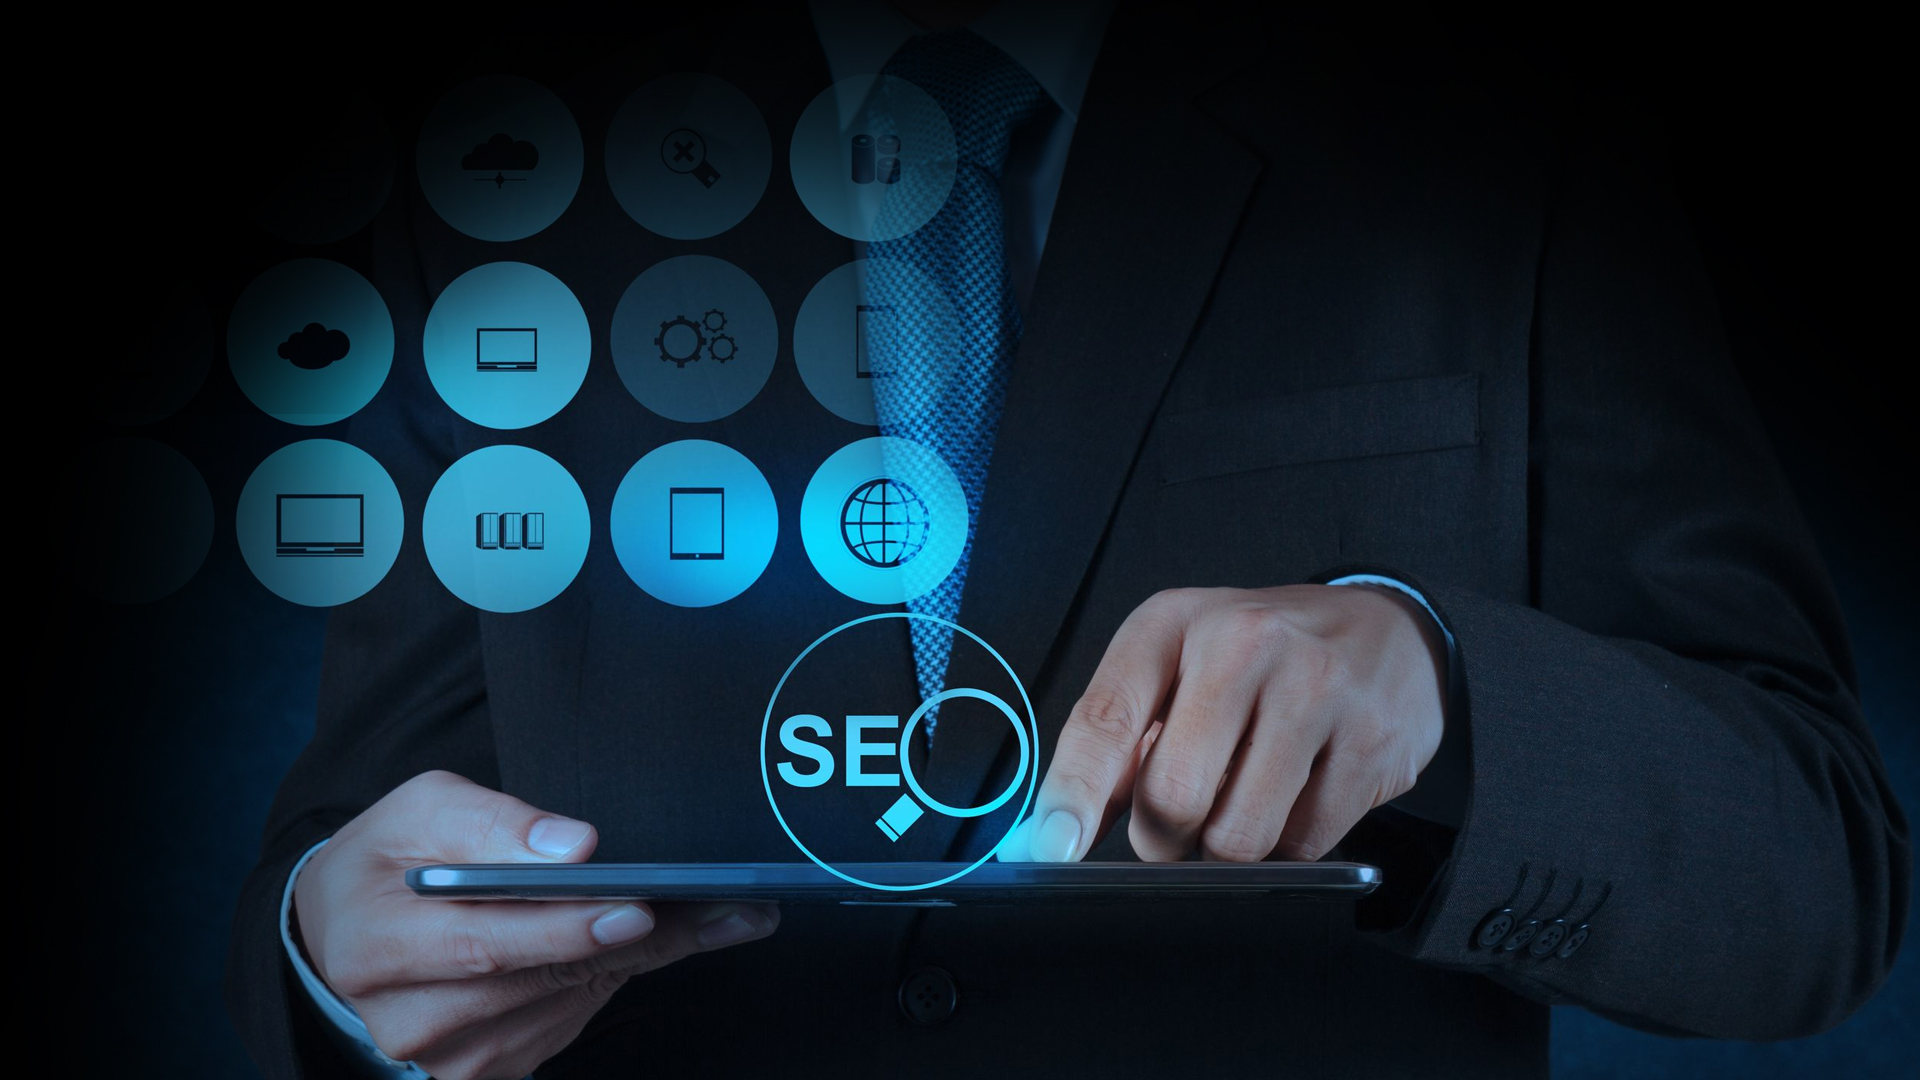 How to find the Ideal SEO Agency That Works for You?